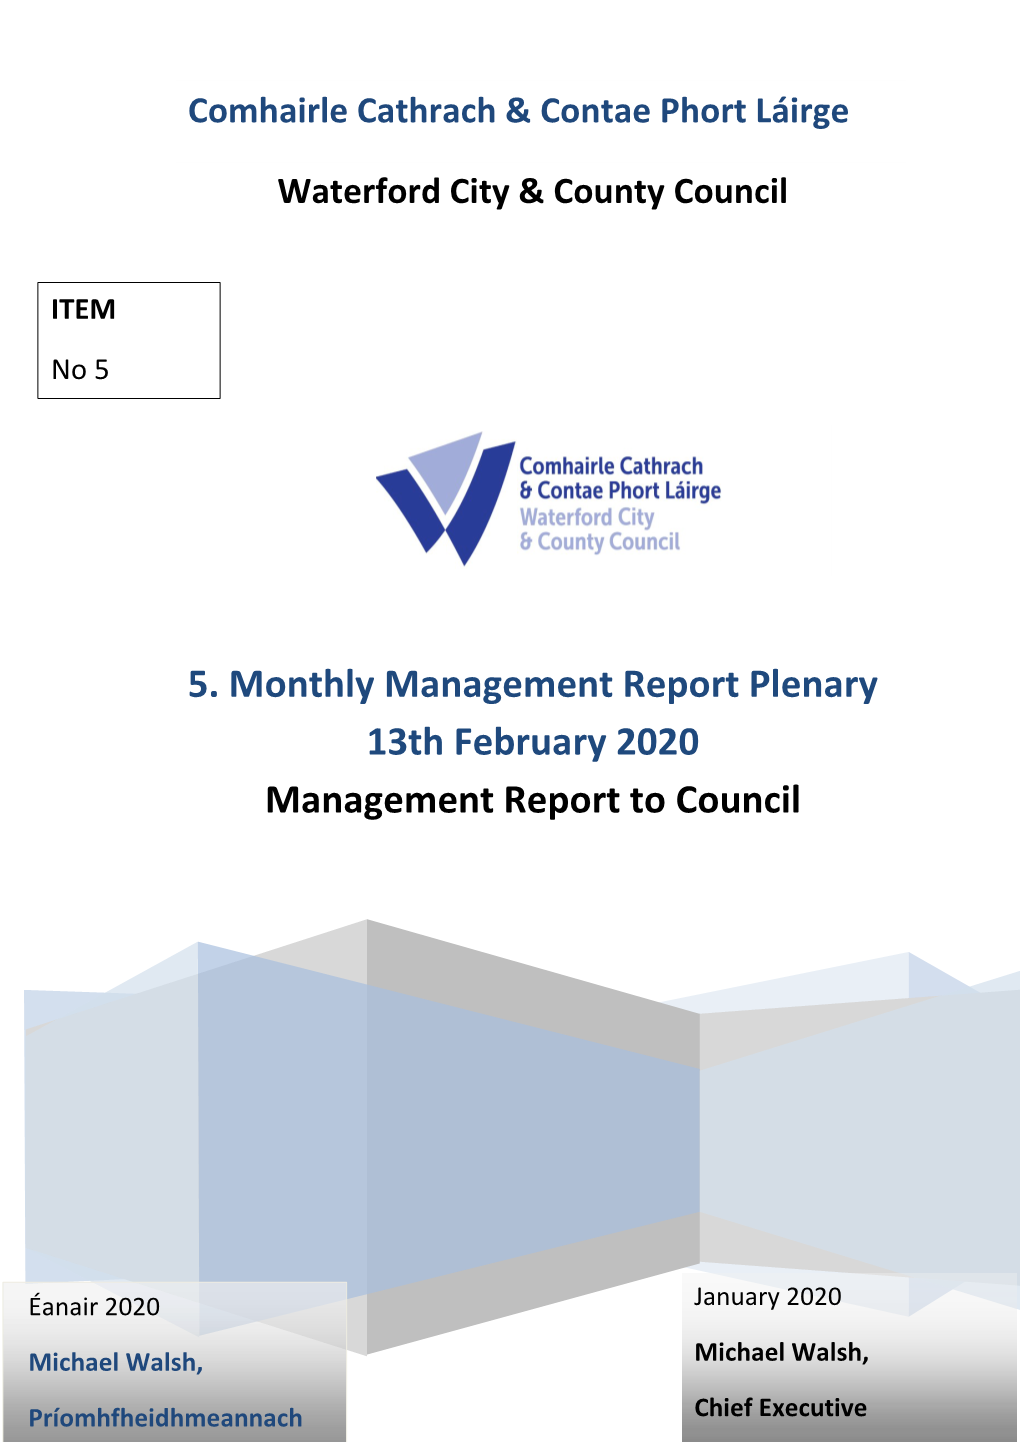 5. Monthly Management Report Plenary 13Th February 2020 Management Report to Council